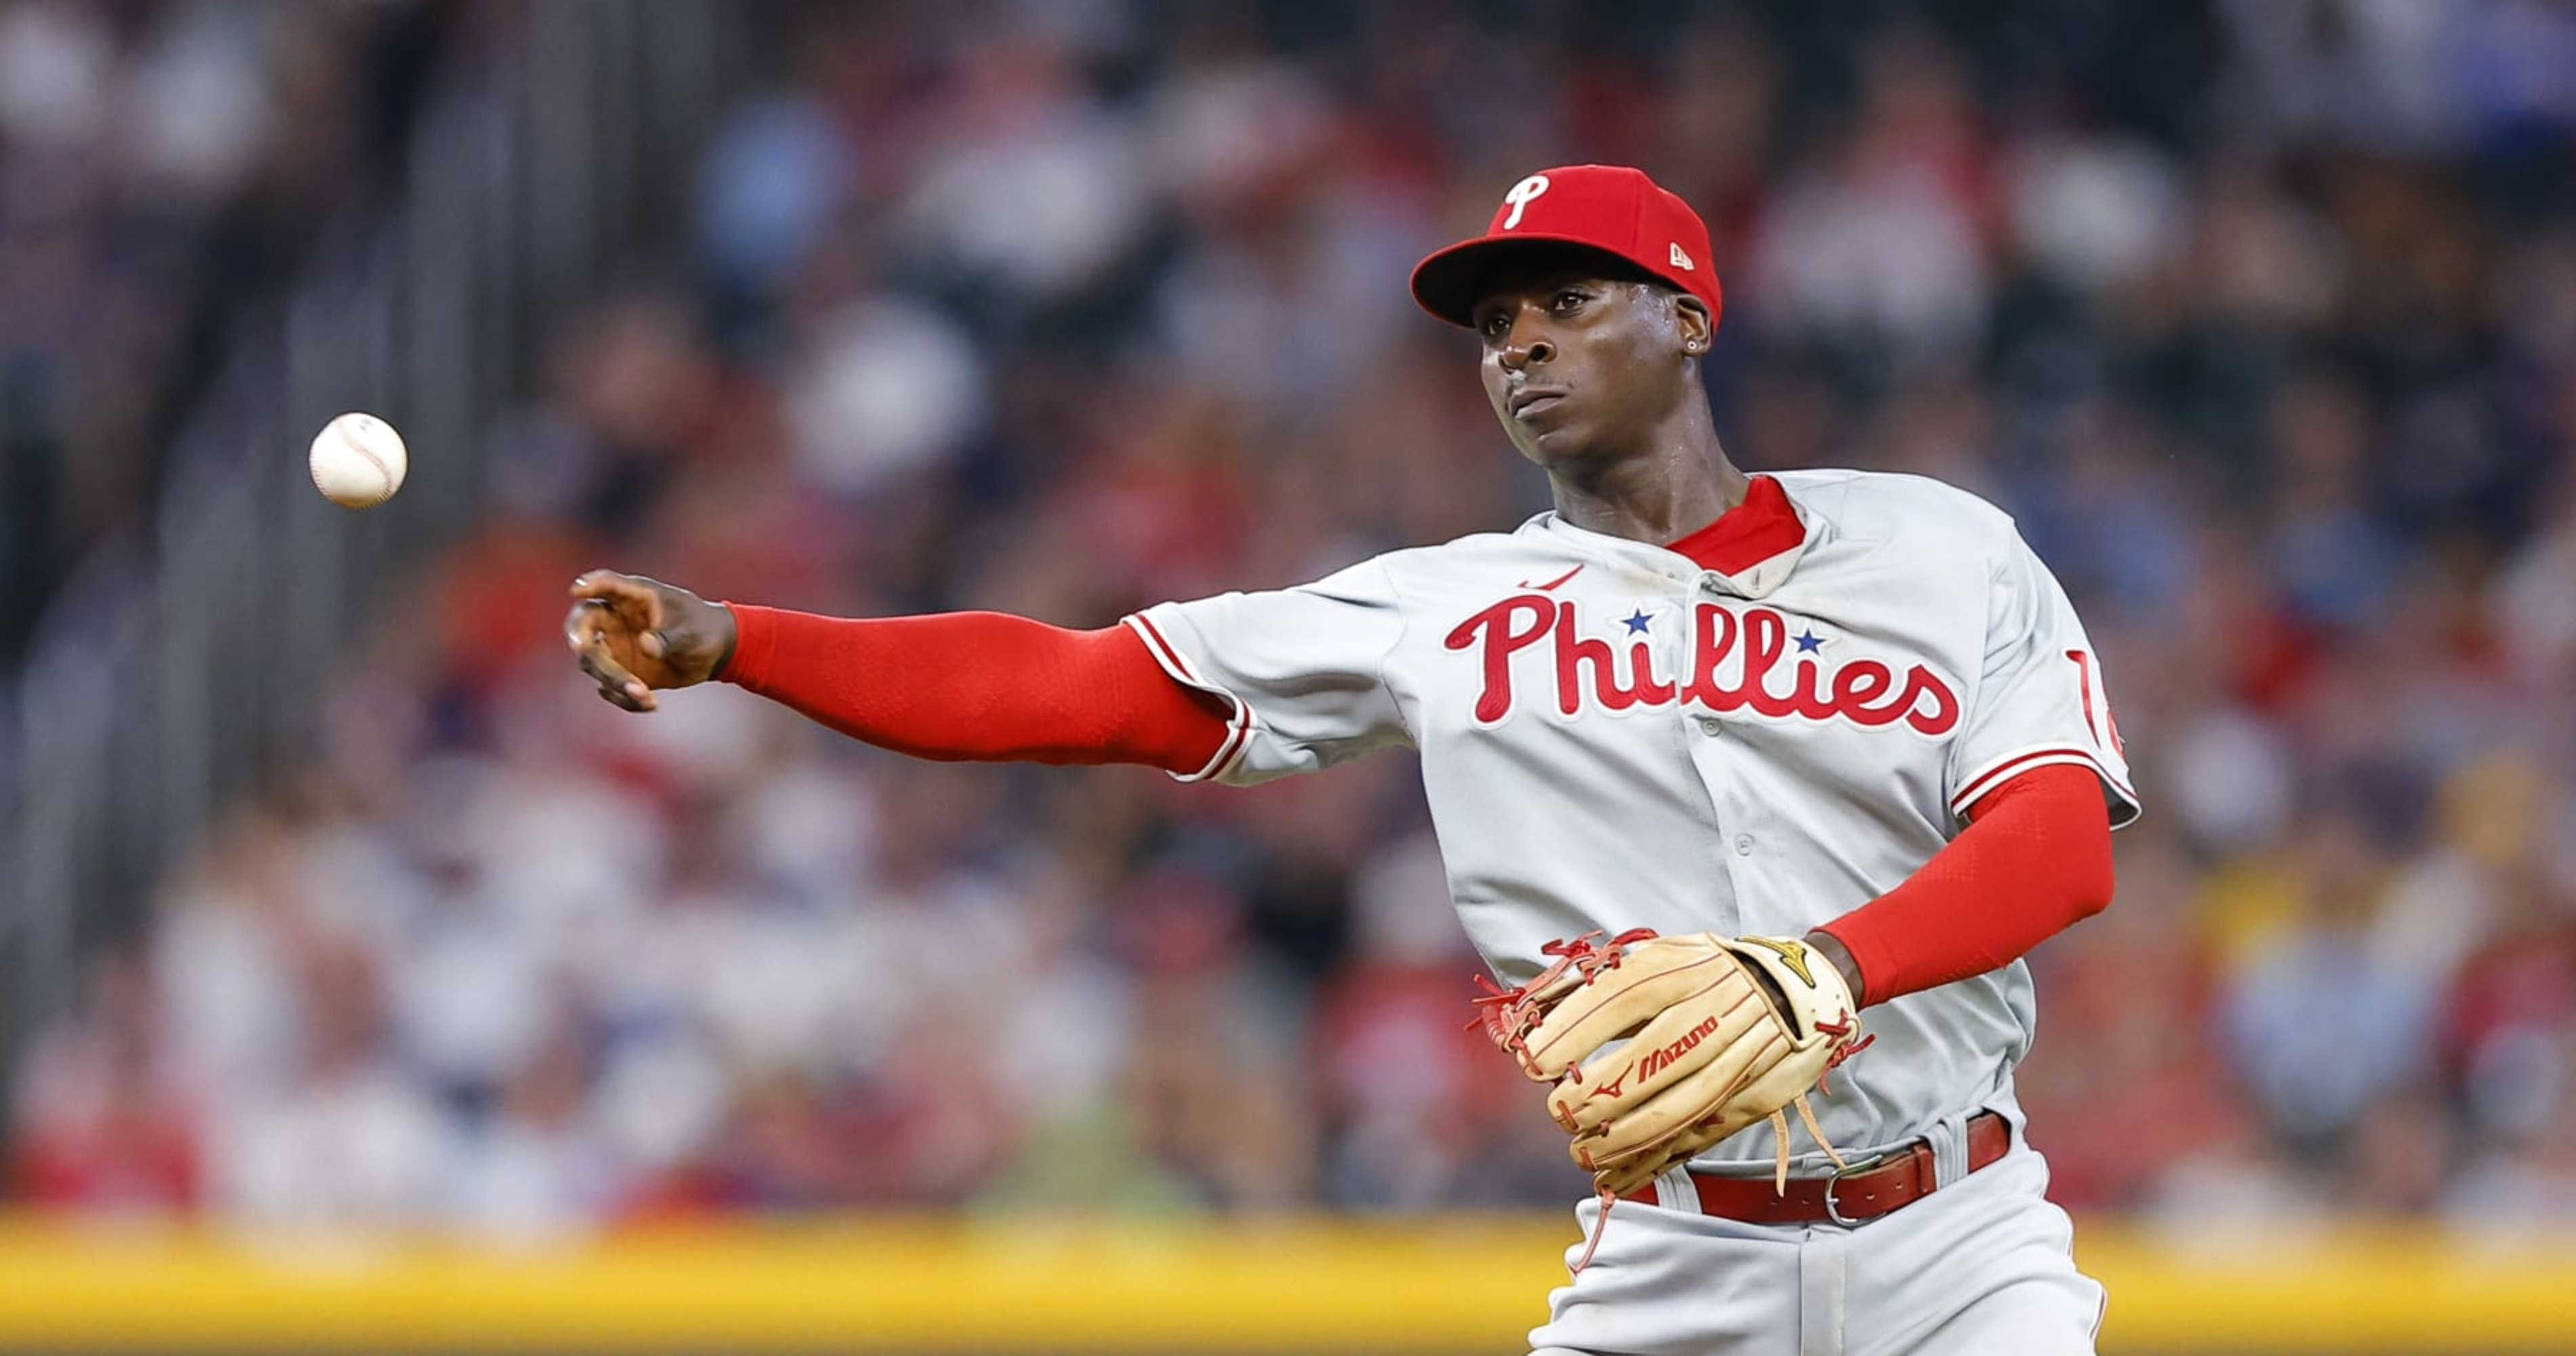 Phillies: Didi Gregorius has monster career stats with bases loaded